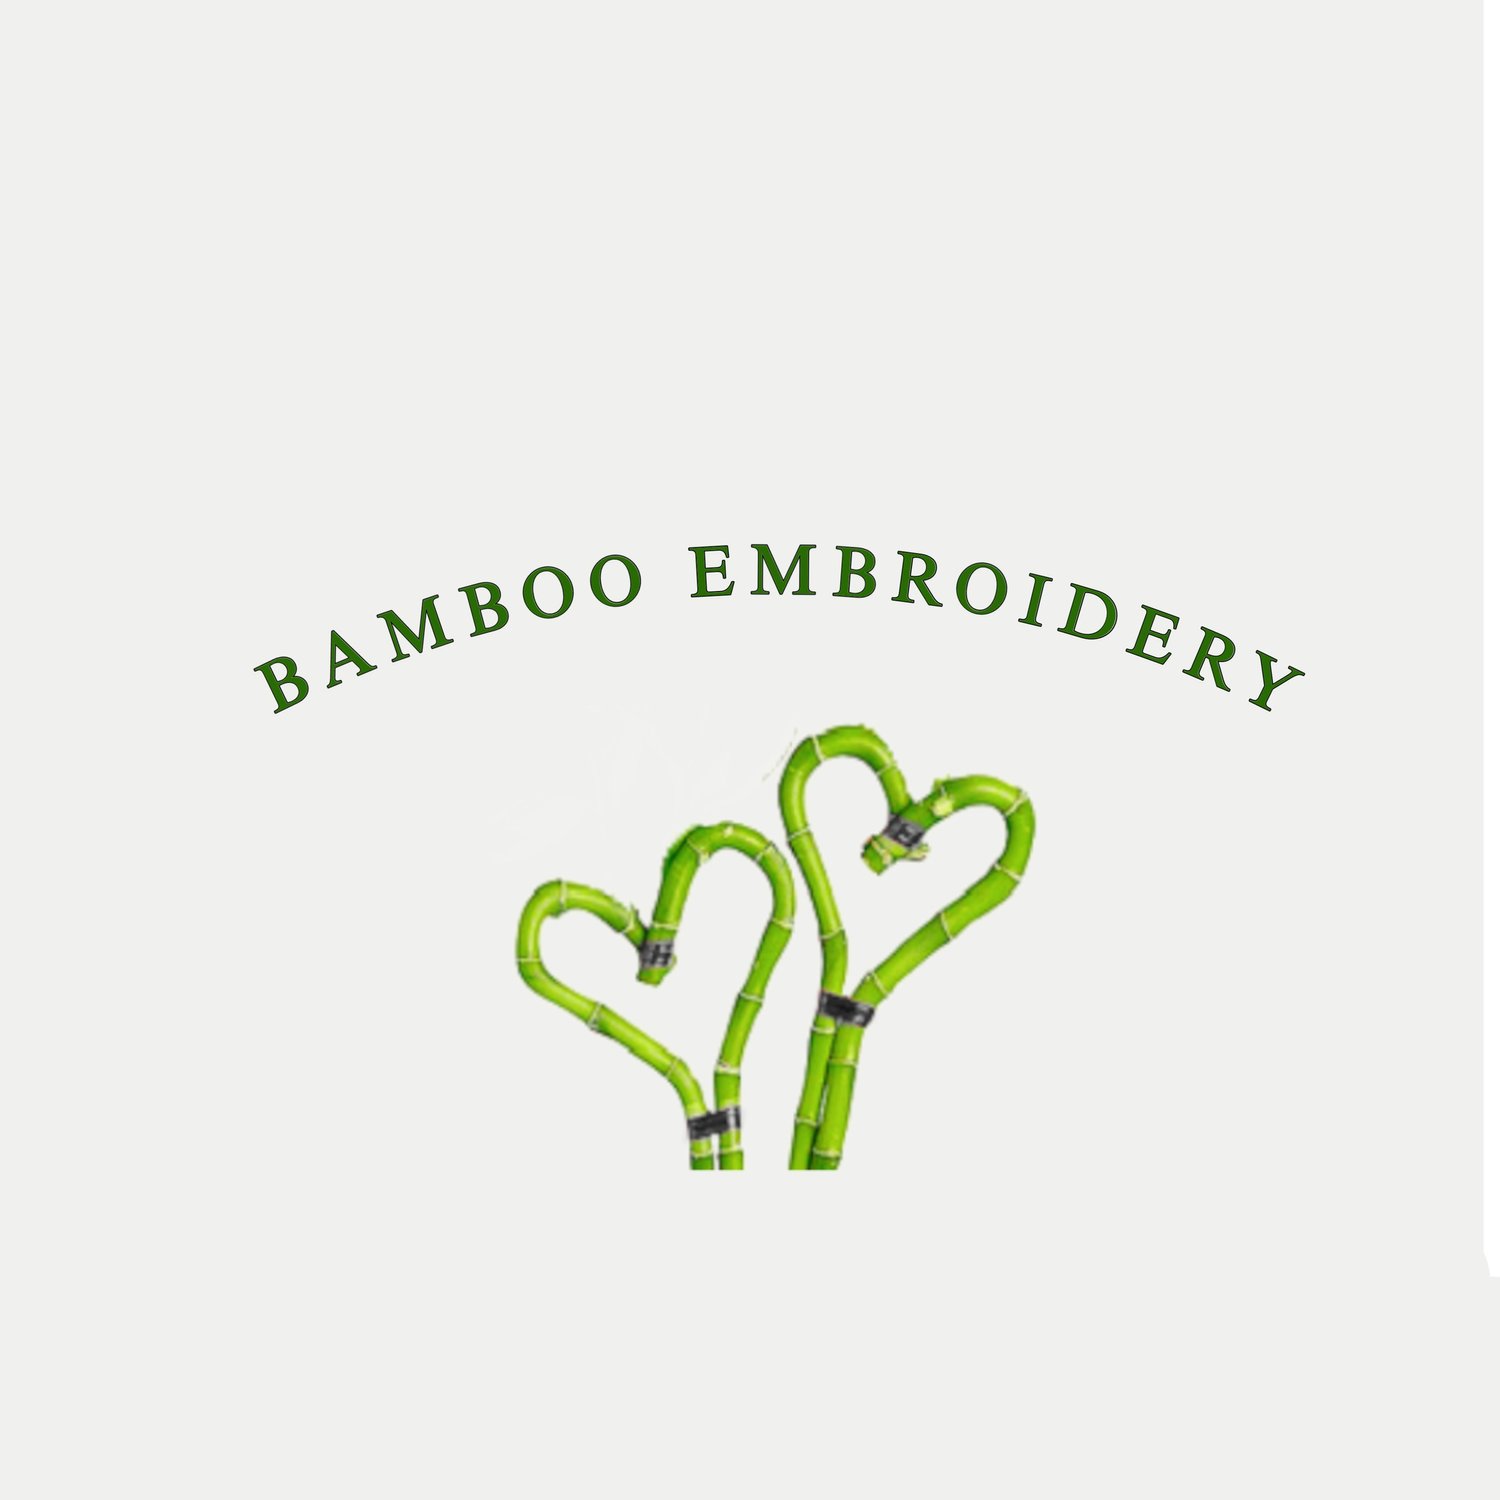 BAMBOO EMBROIDERY